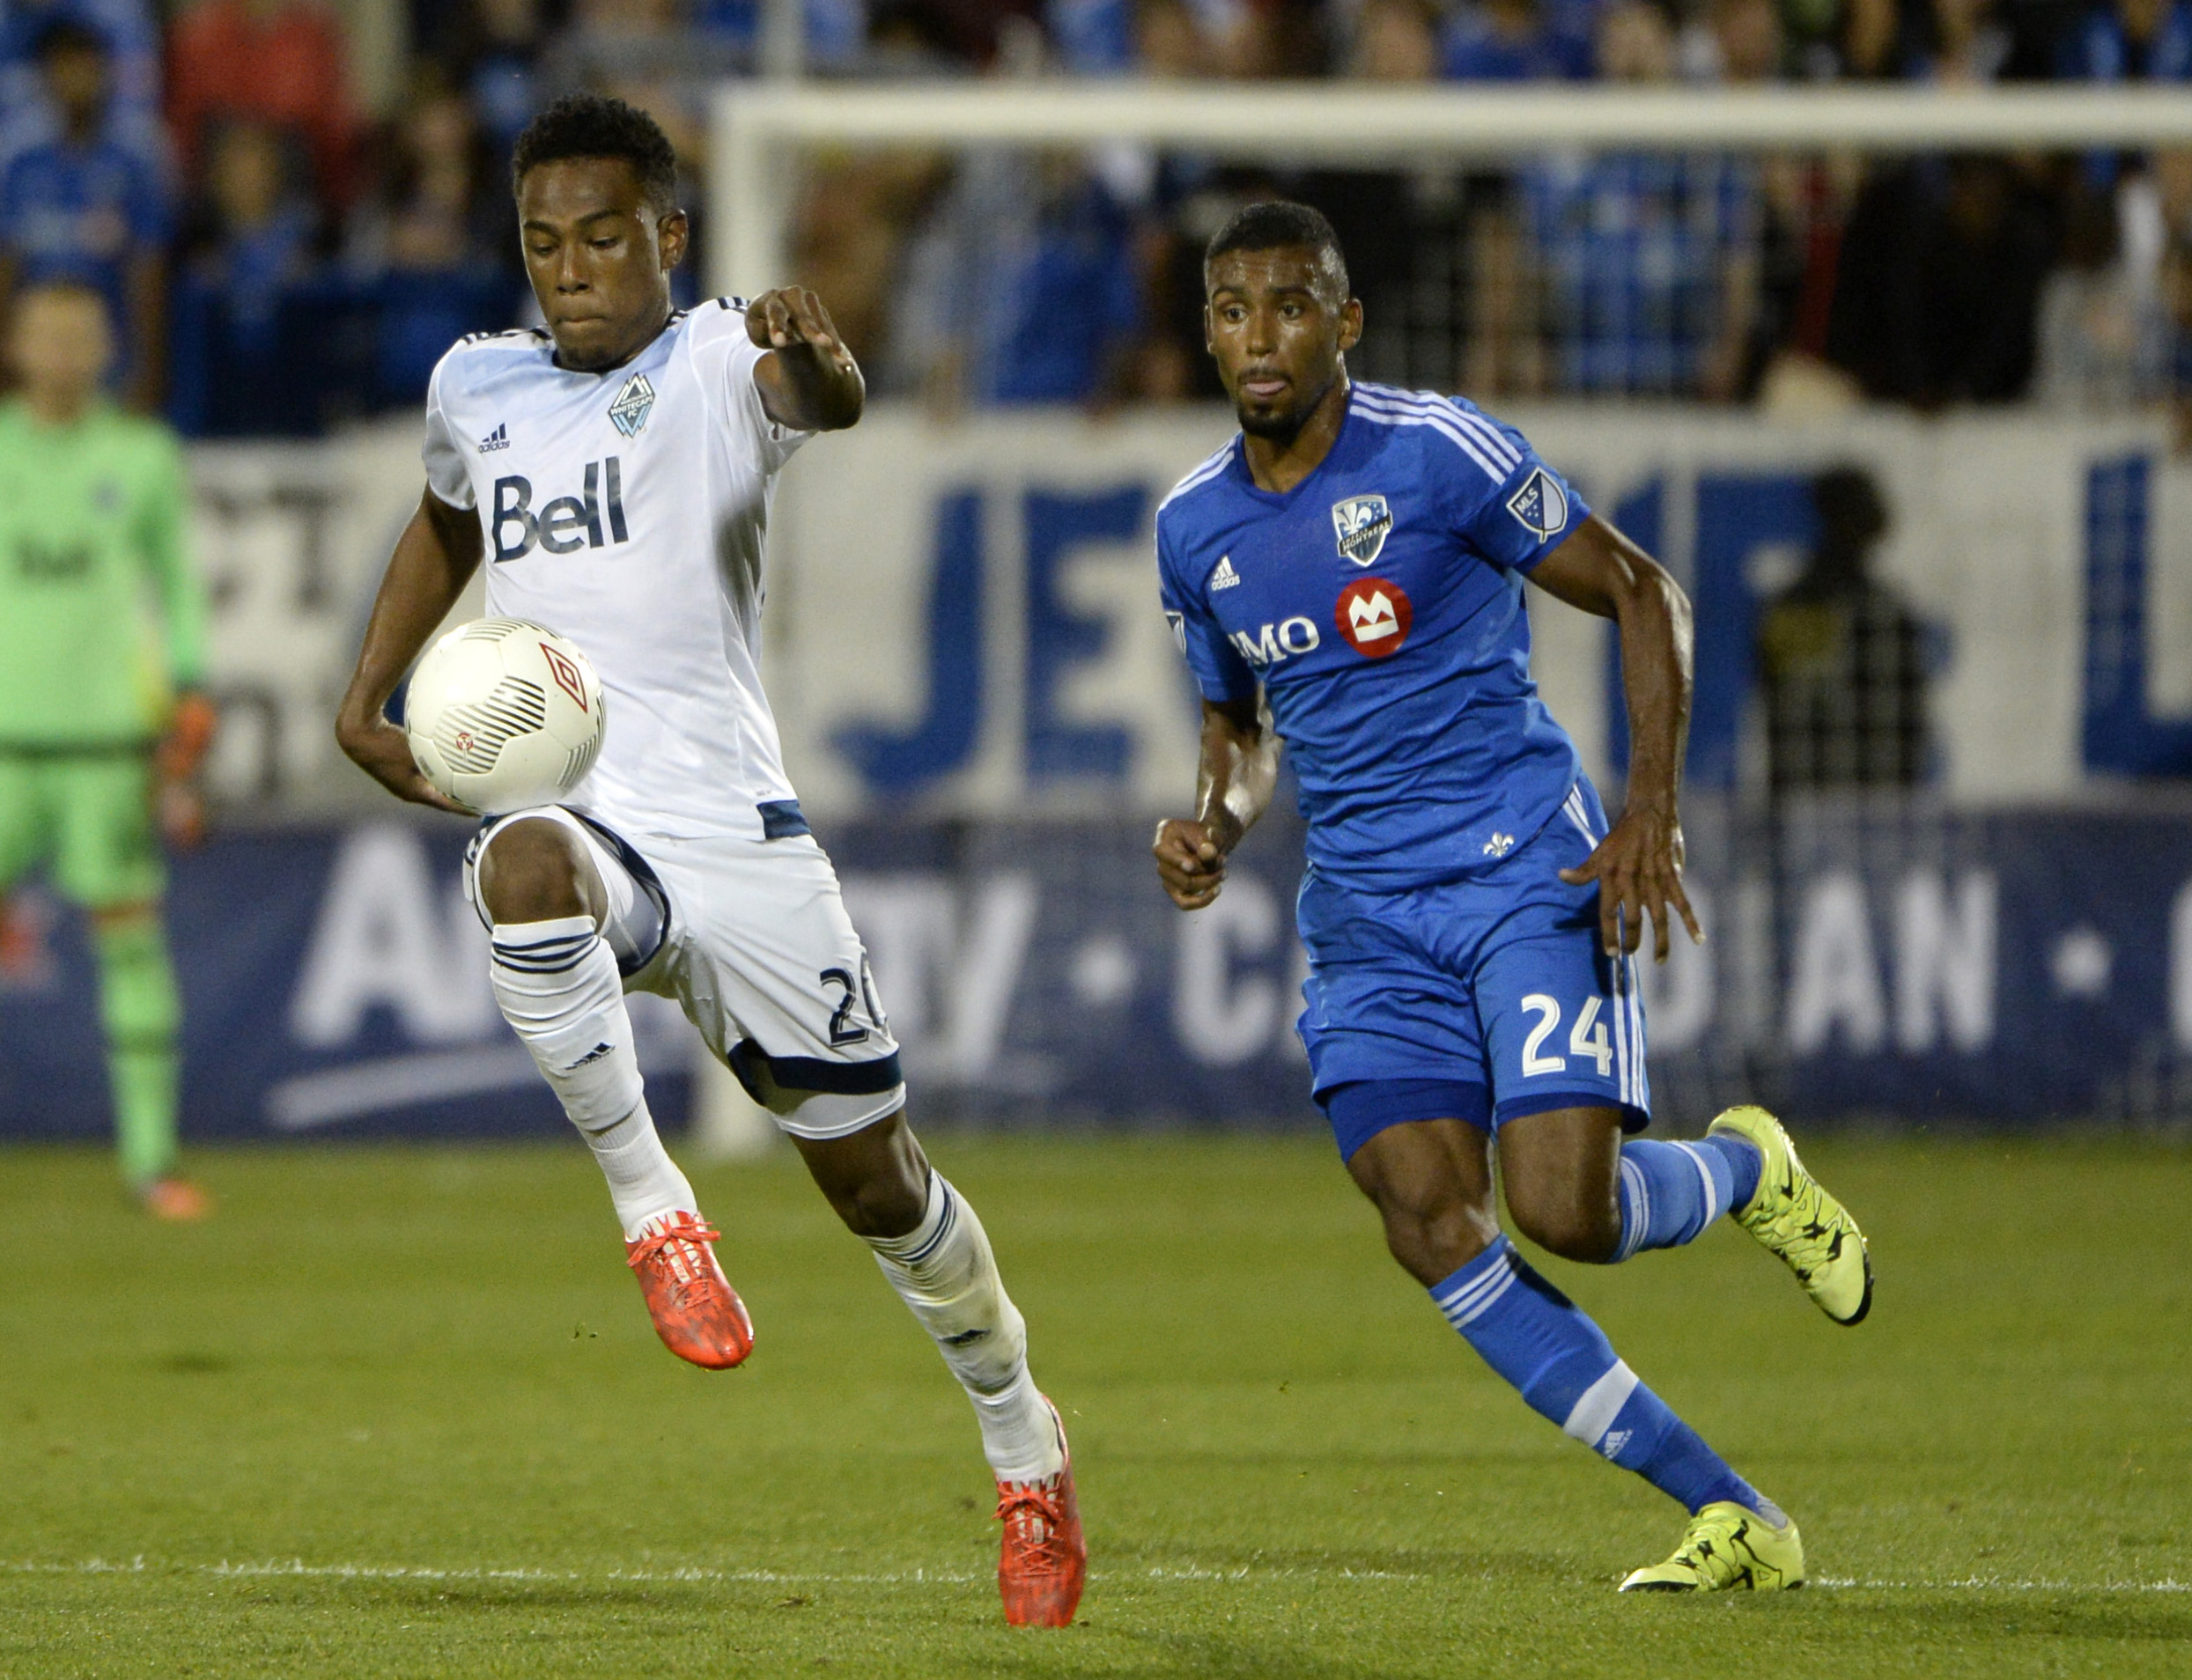 Jackson-Hamel chases down the ball in IMFC 2-2 draw with VWFC.